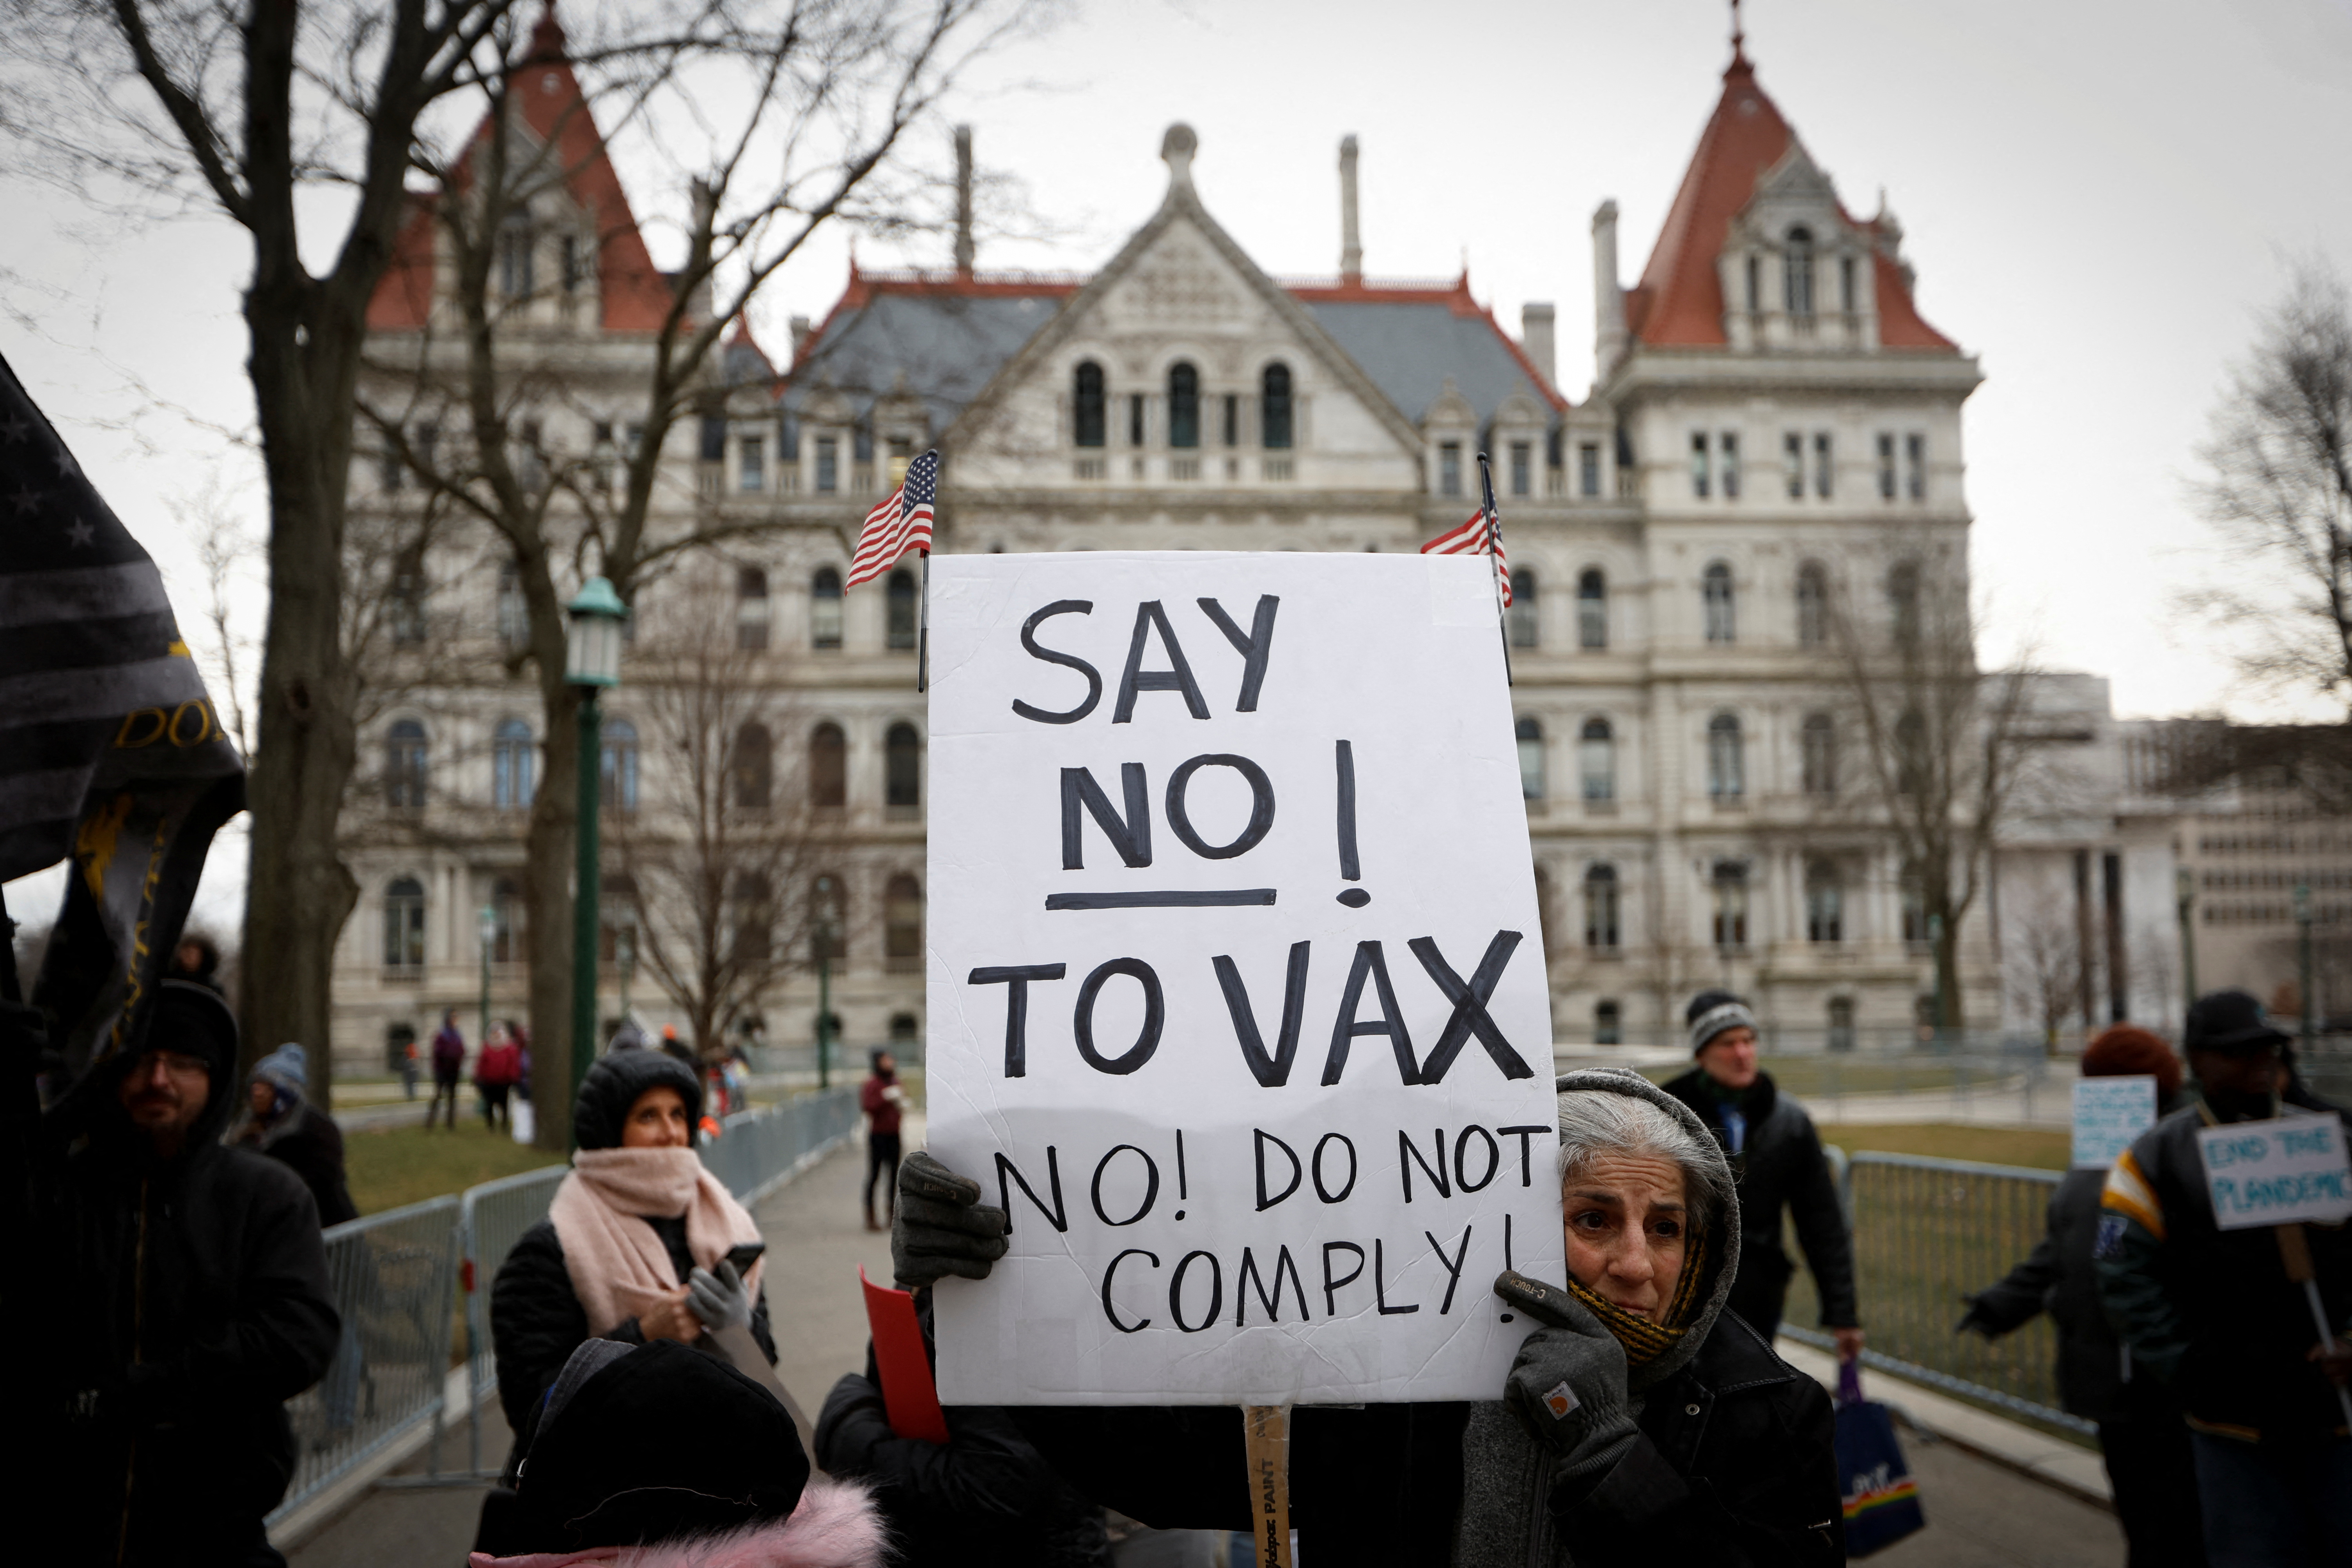 A protester holds a banner at a rally against mandates for the vaccines against the coronavirus disease (COVID-19) outside the New York State Capitol in Albany, New York, U.S., January 5, 2022. REUTERS/Mike Segar